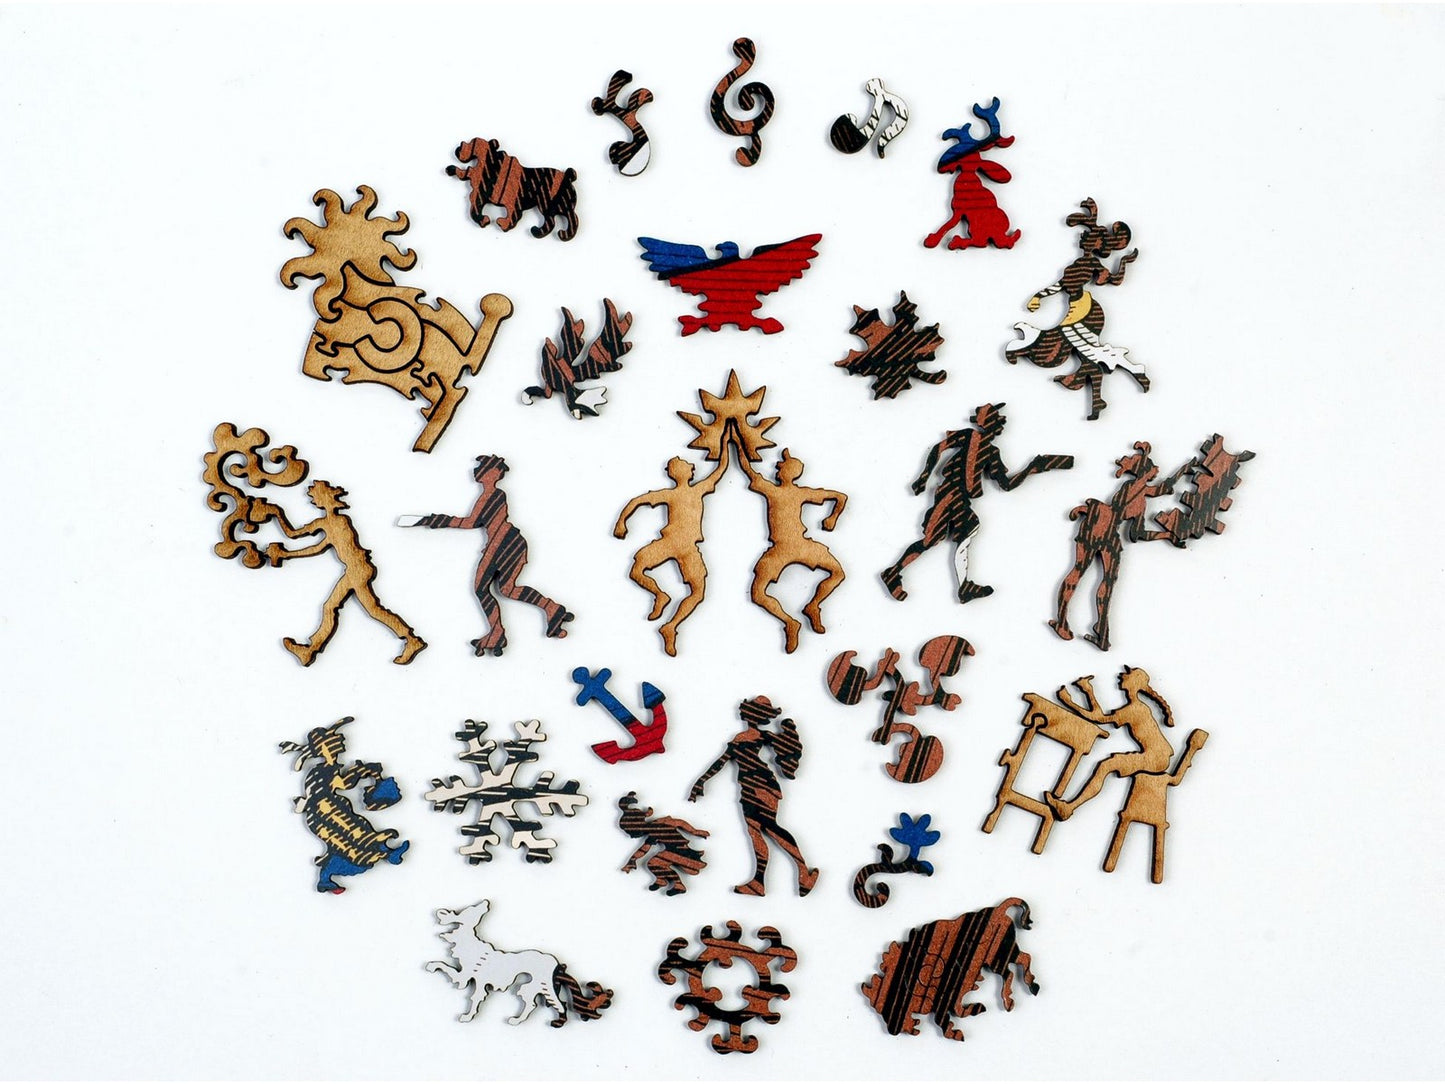 The whimsy pieces that can be found in the puzzle, Liberty Eagle.